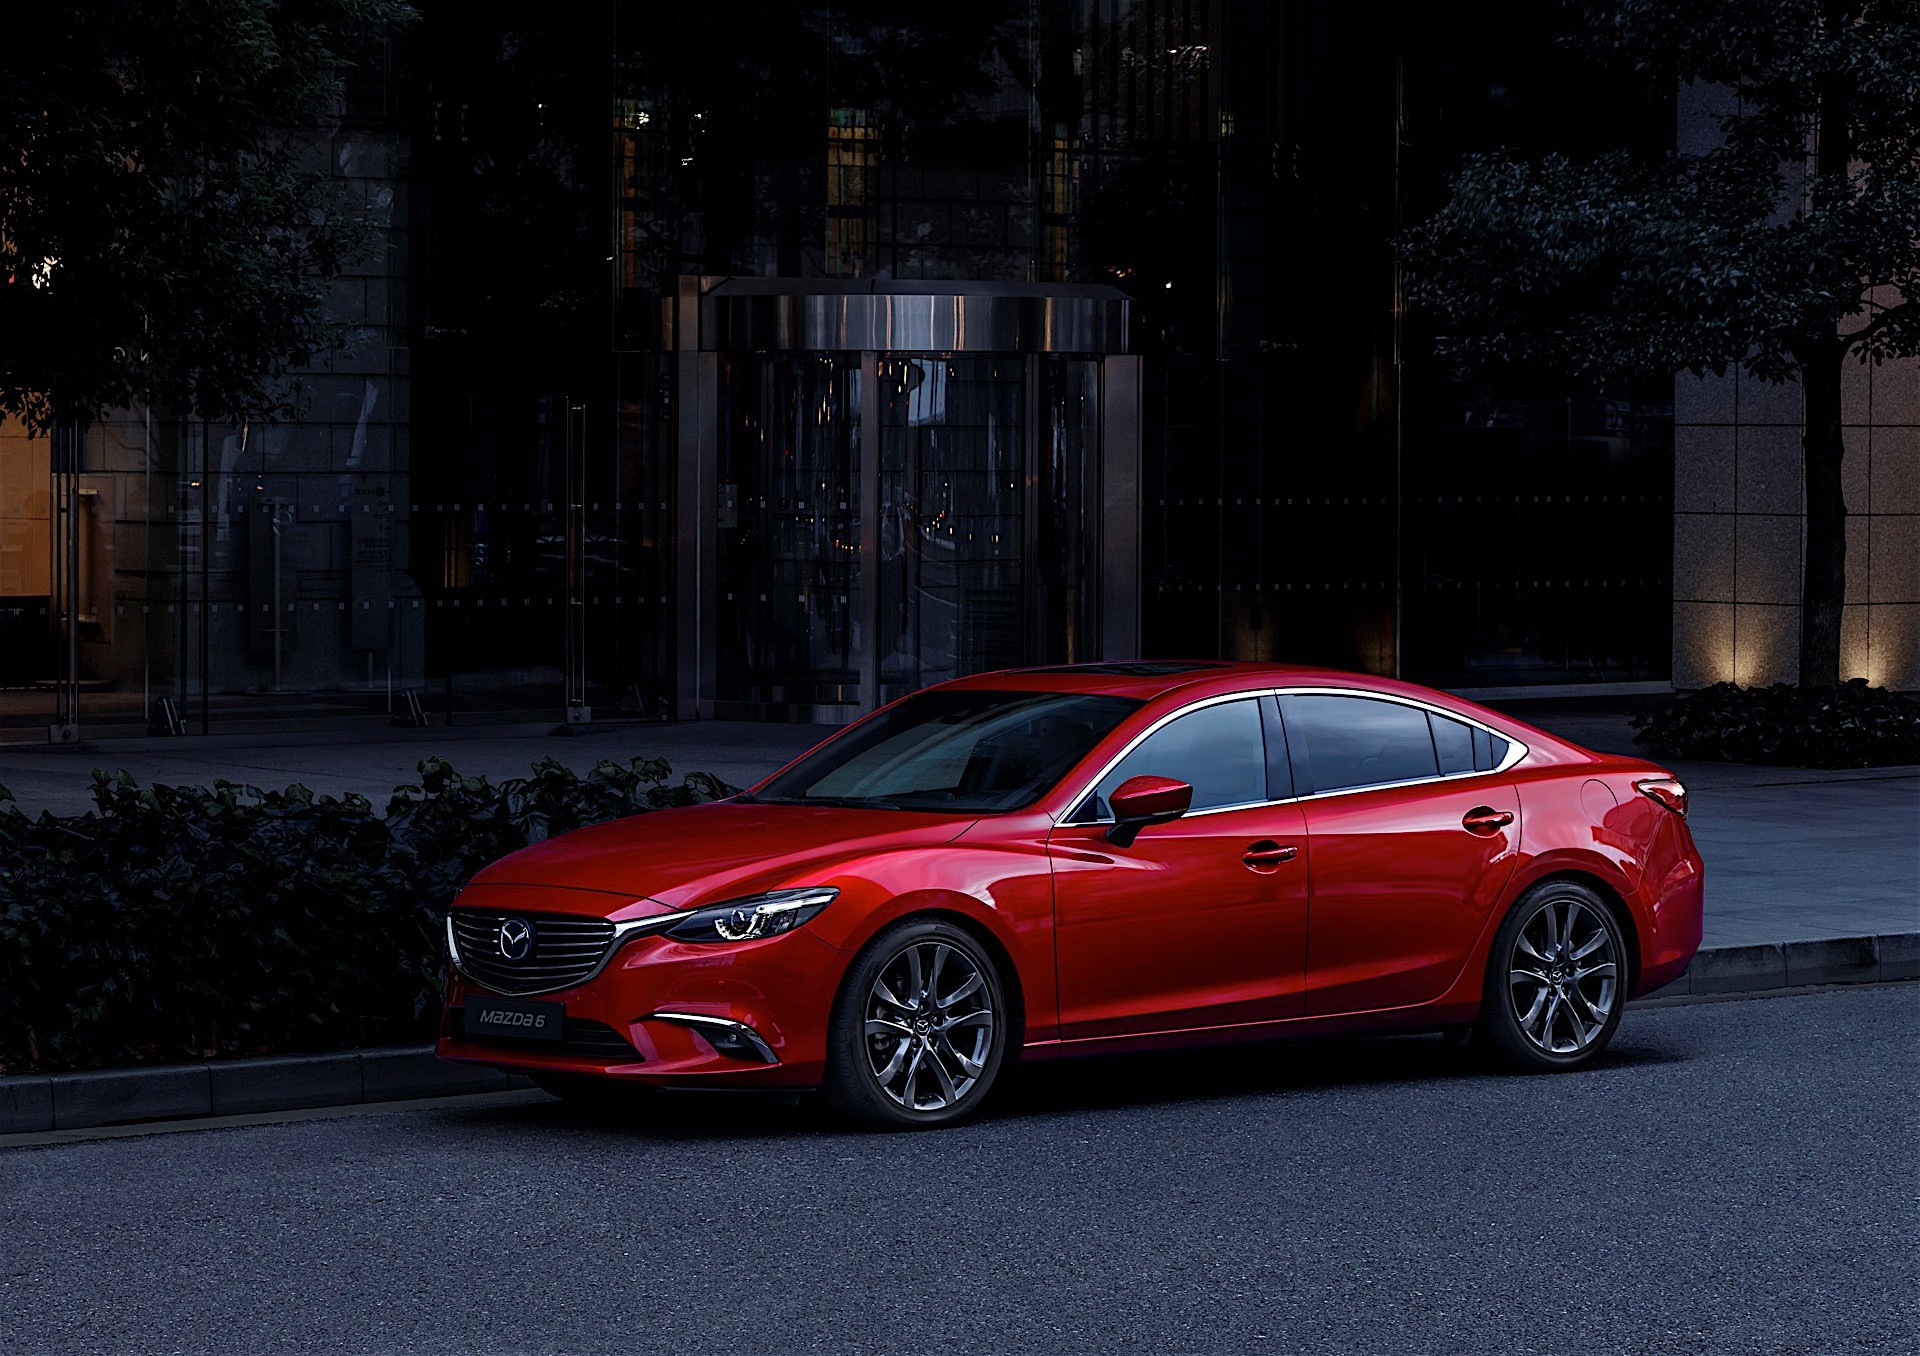 2017 Mazda6 Will Be Launched In Europe This Autumn, Has G-Vectoring ...